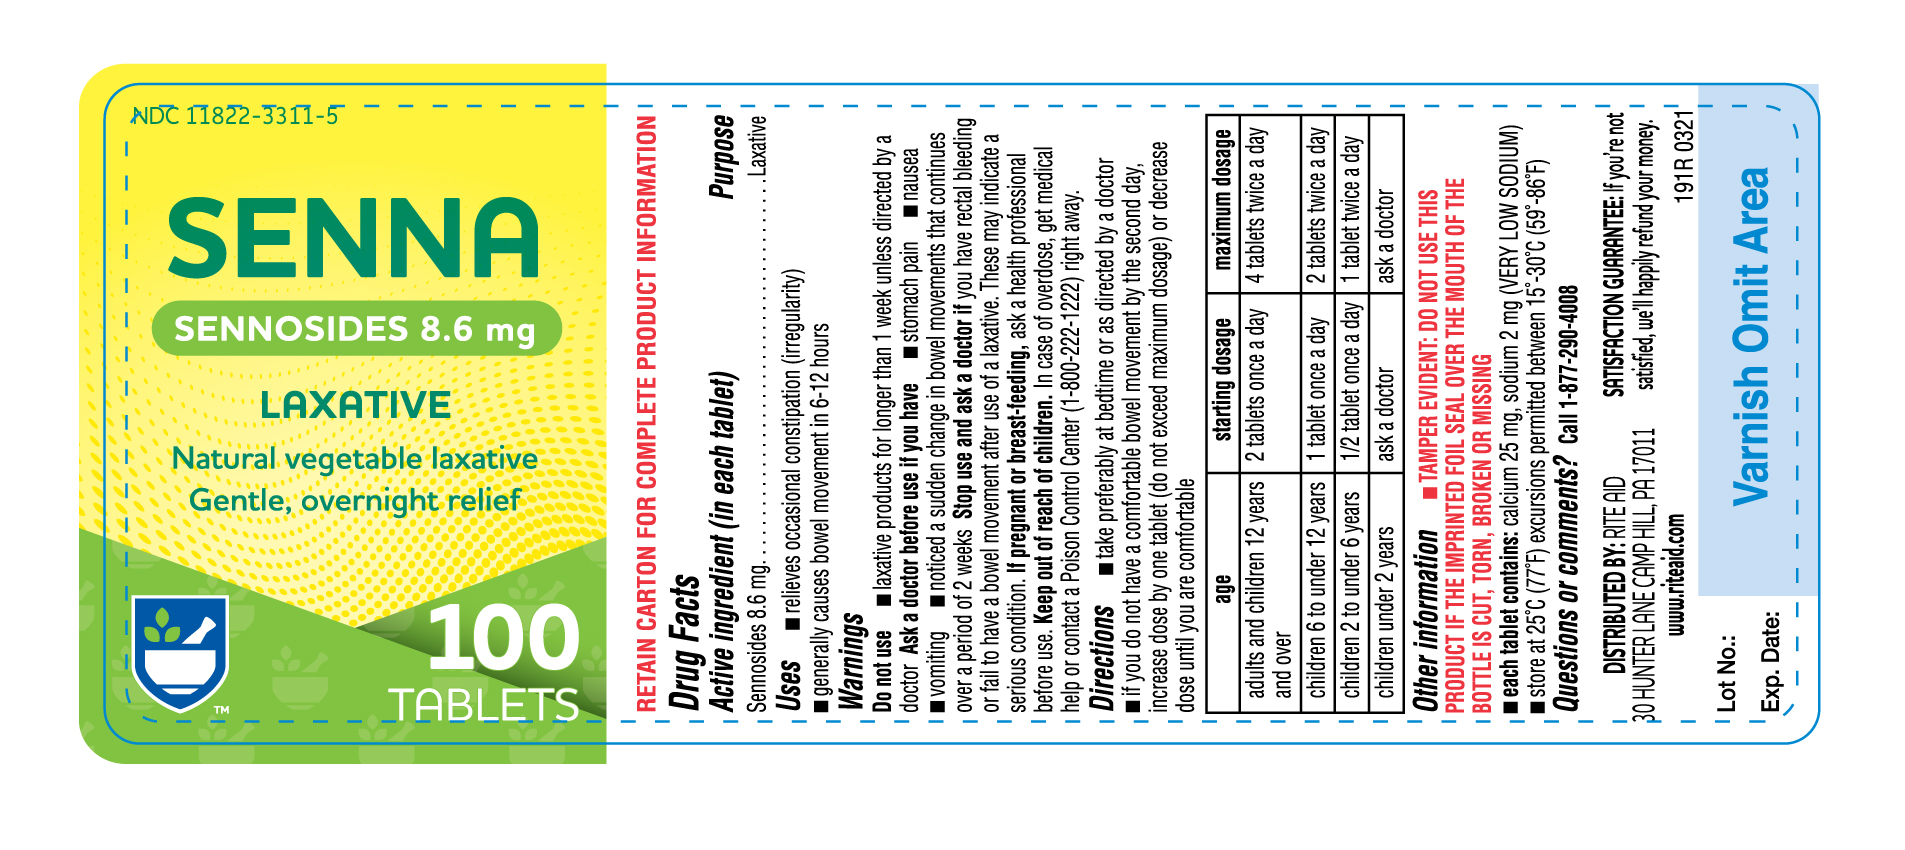 191R-Rite Aid-Laxative Senna Tablets-bottle label-100s